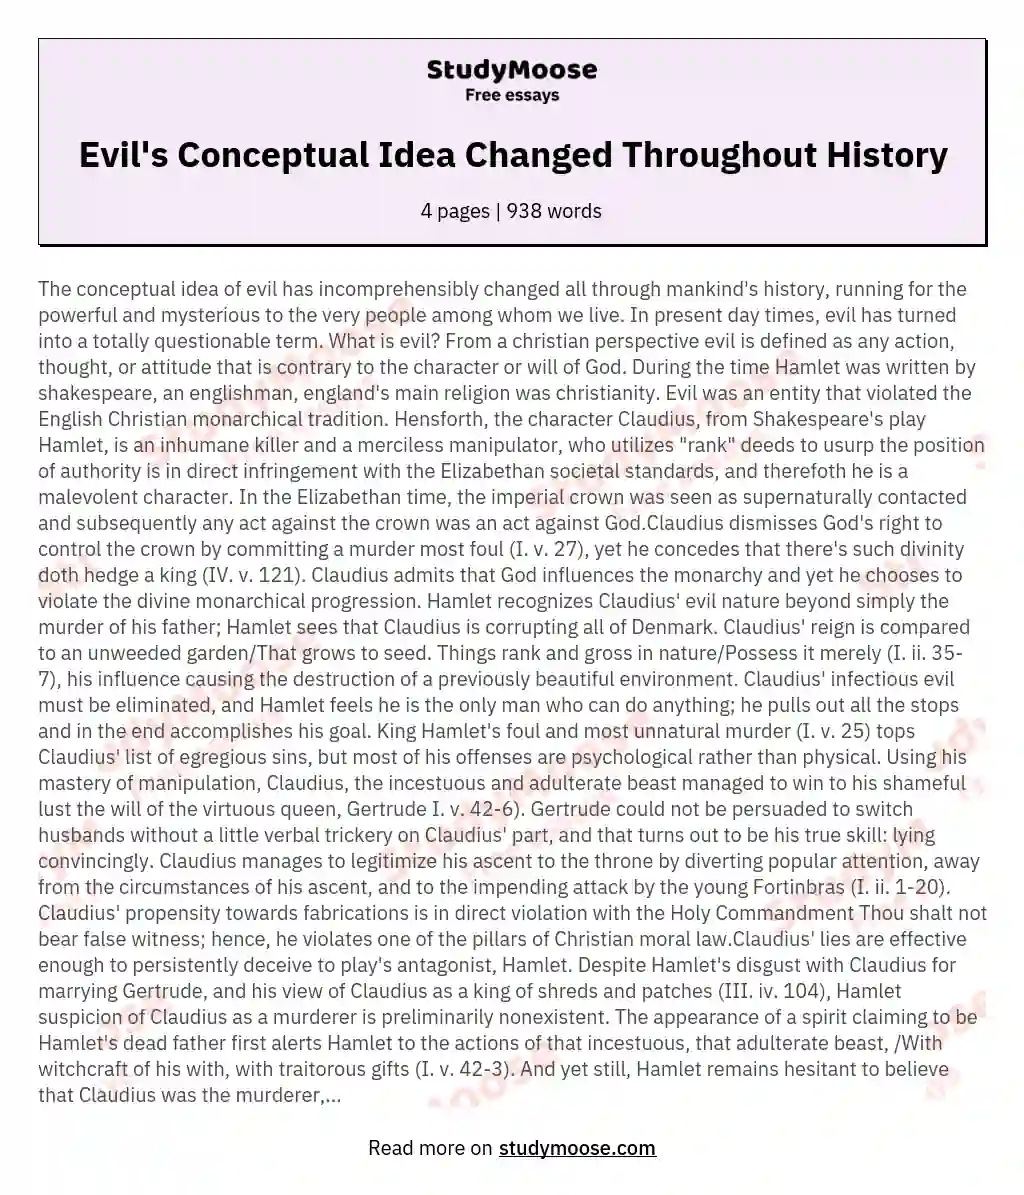 Evil's Conceptual Idea Changed Throughout History essay